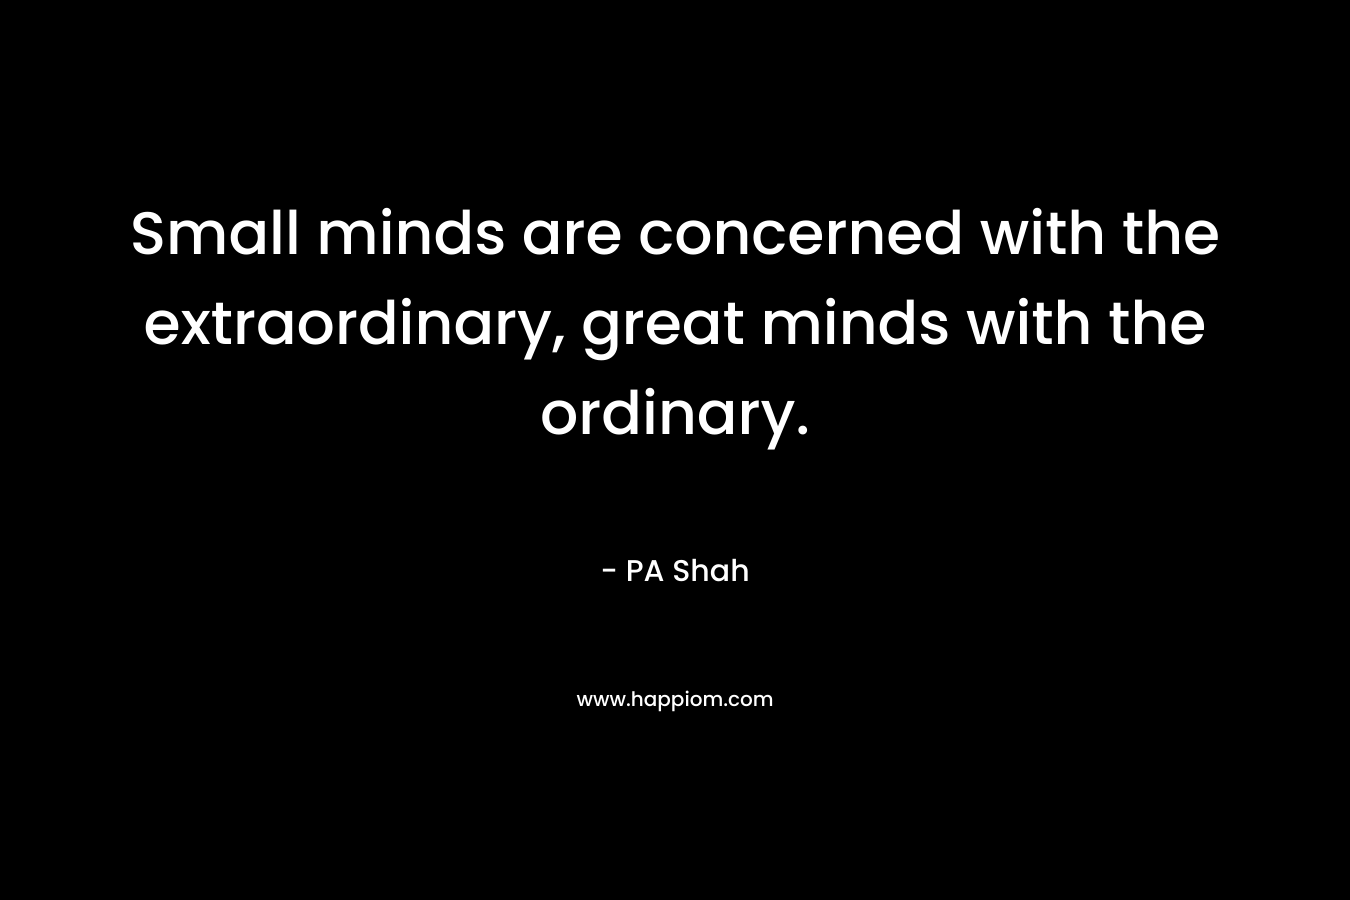 Small minds are concerned with the extraordinary, great minds with the ordinary. – PA Shah